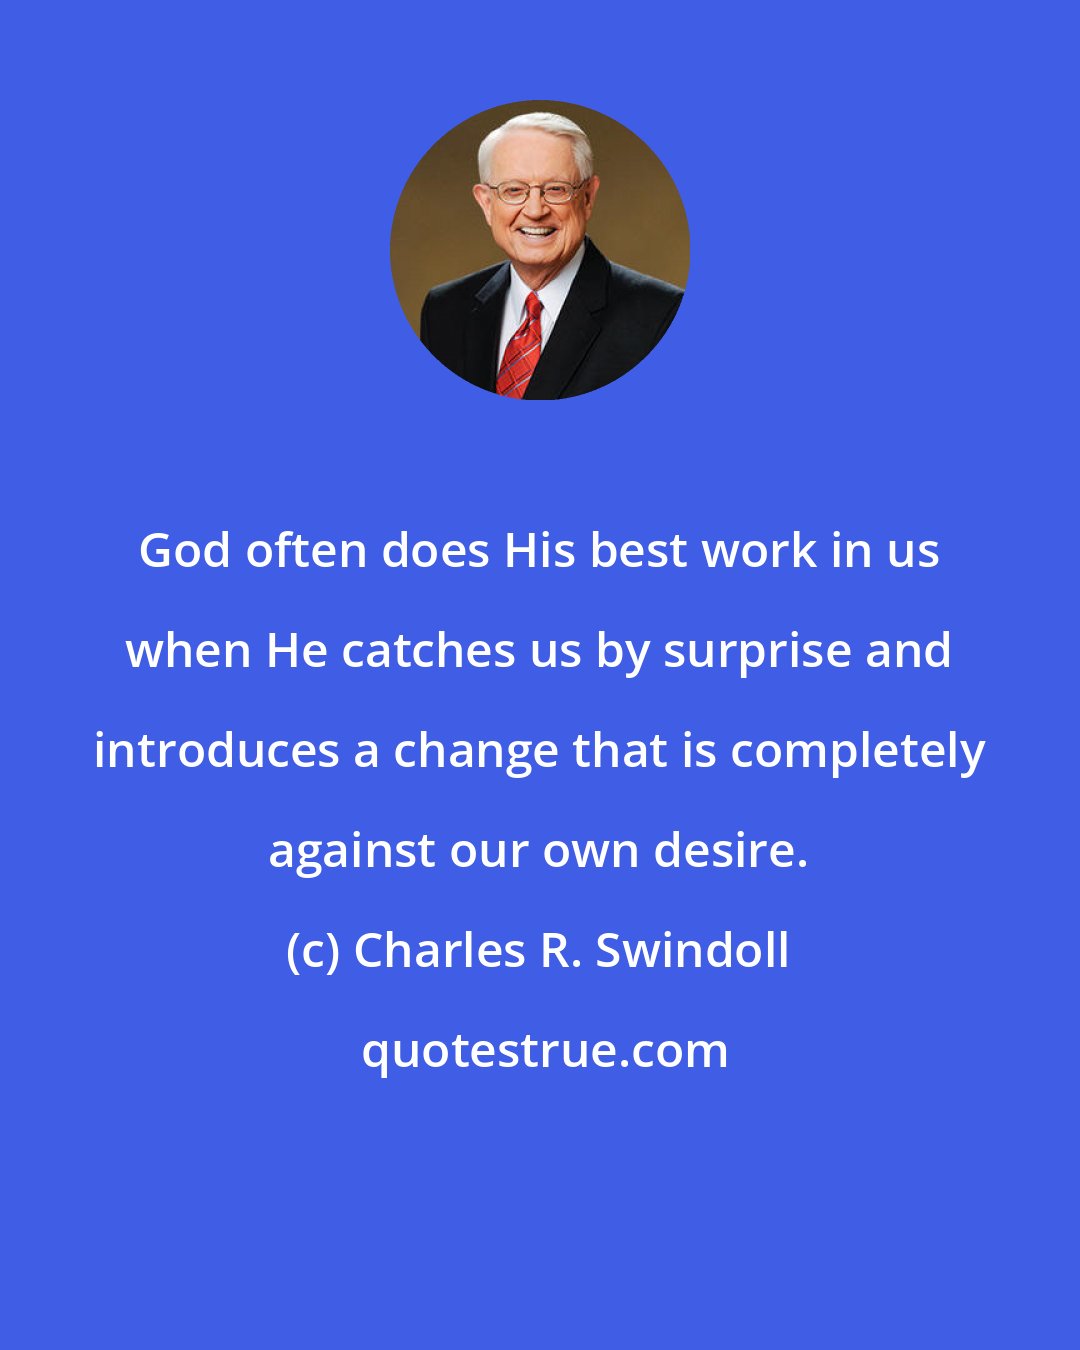 Charles R. Swindoll: God often does His best work in us when He catches us by surprise and introduces a change that is completely against our own desire.